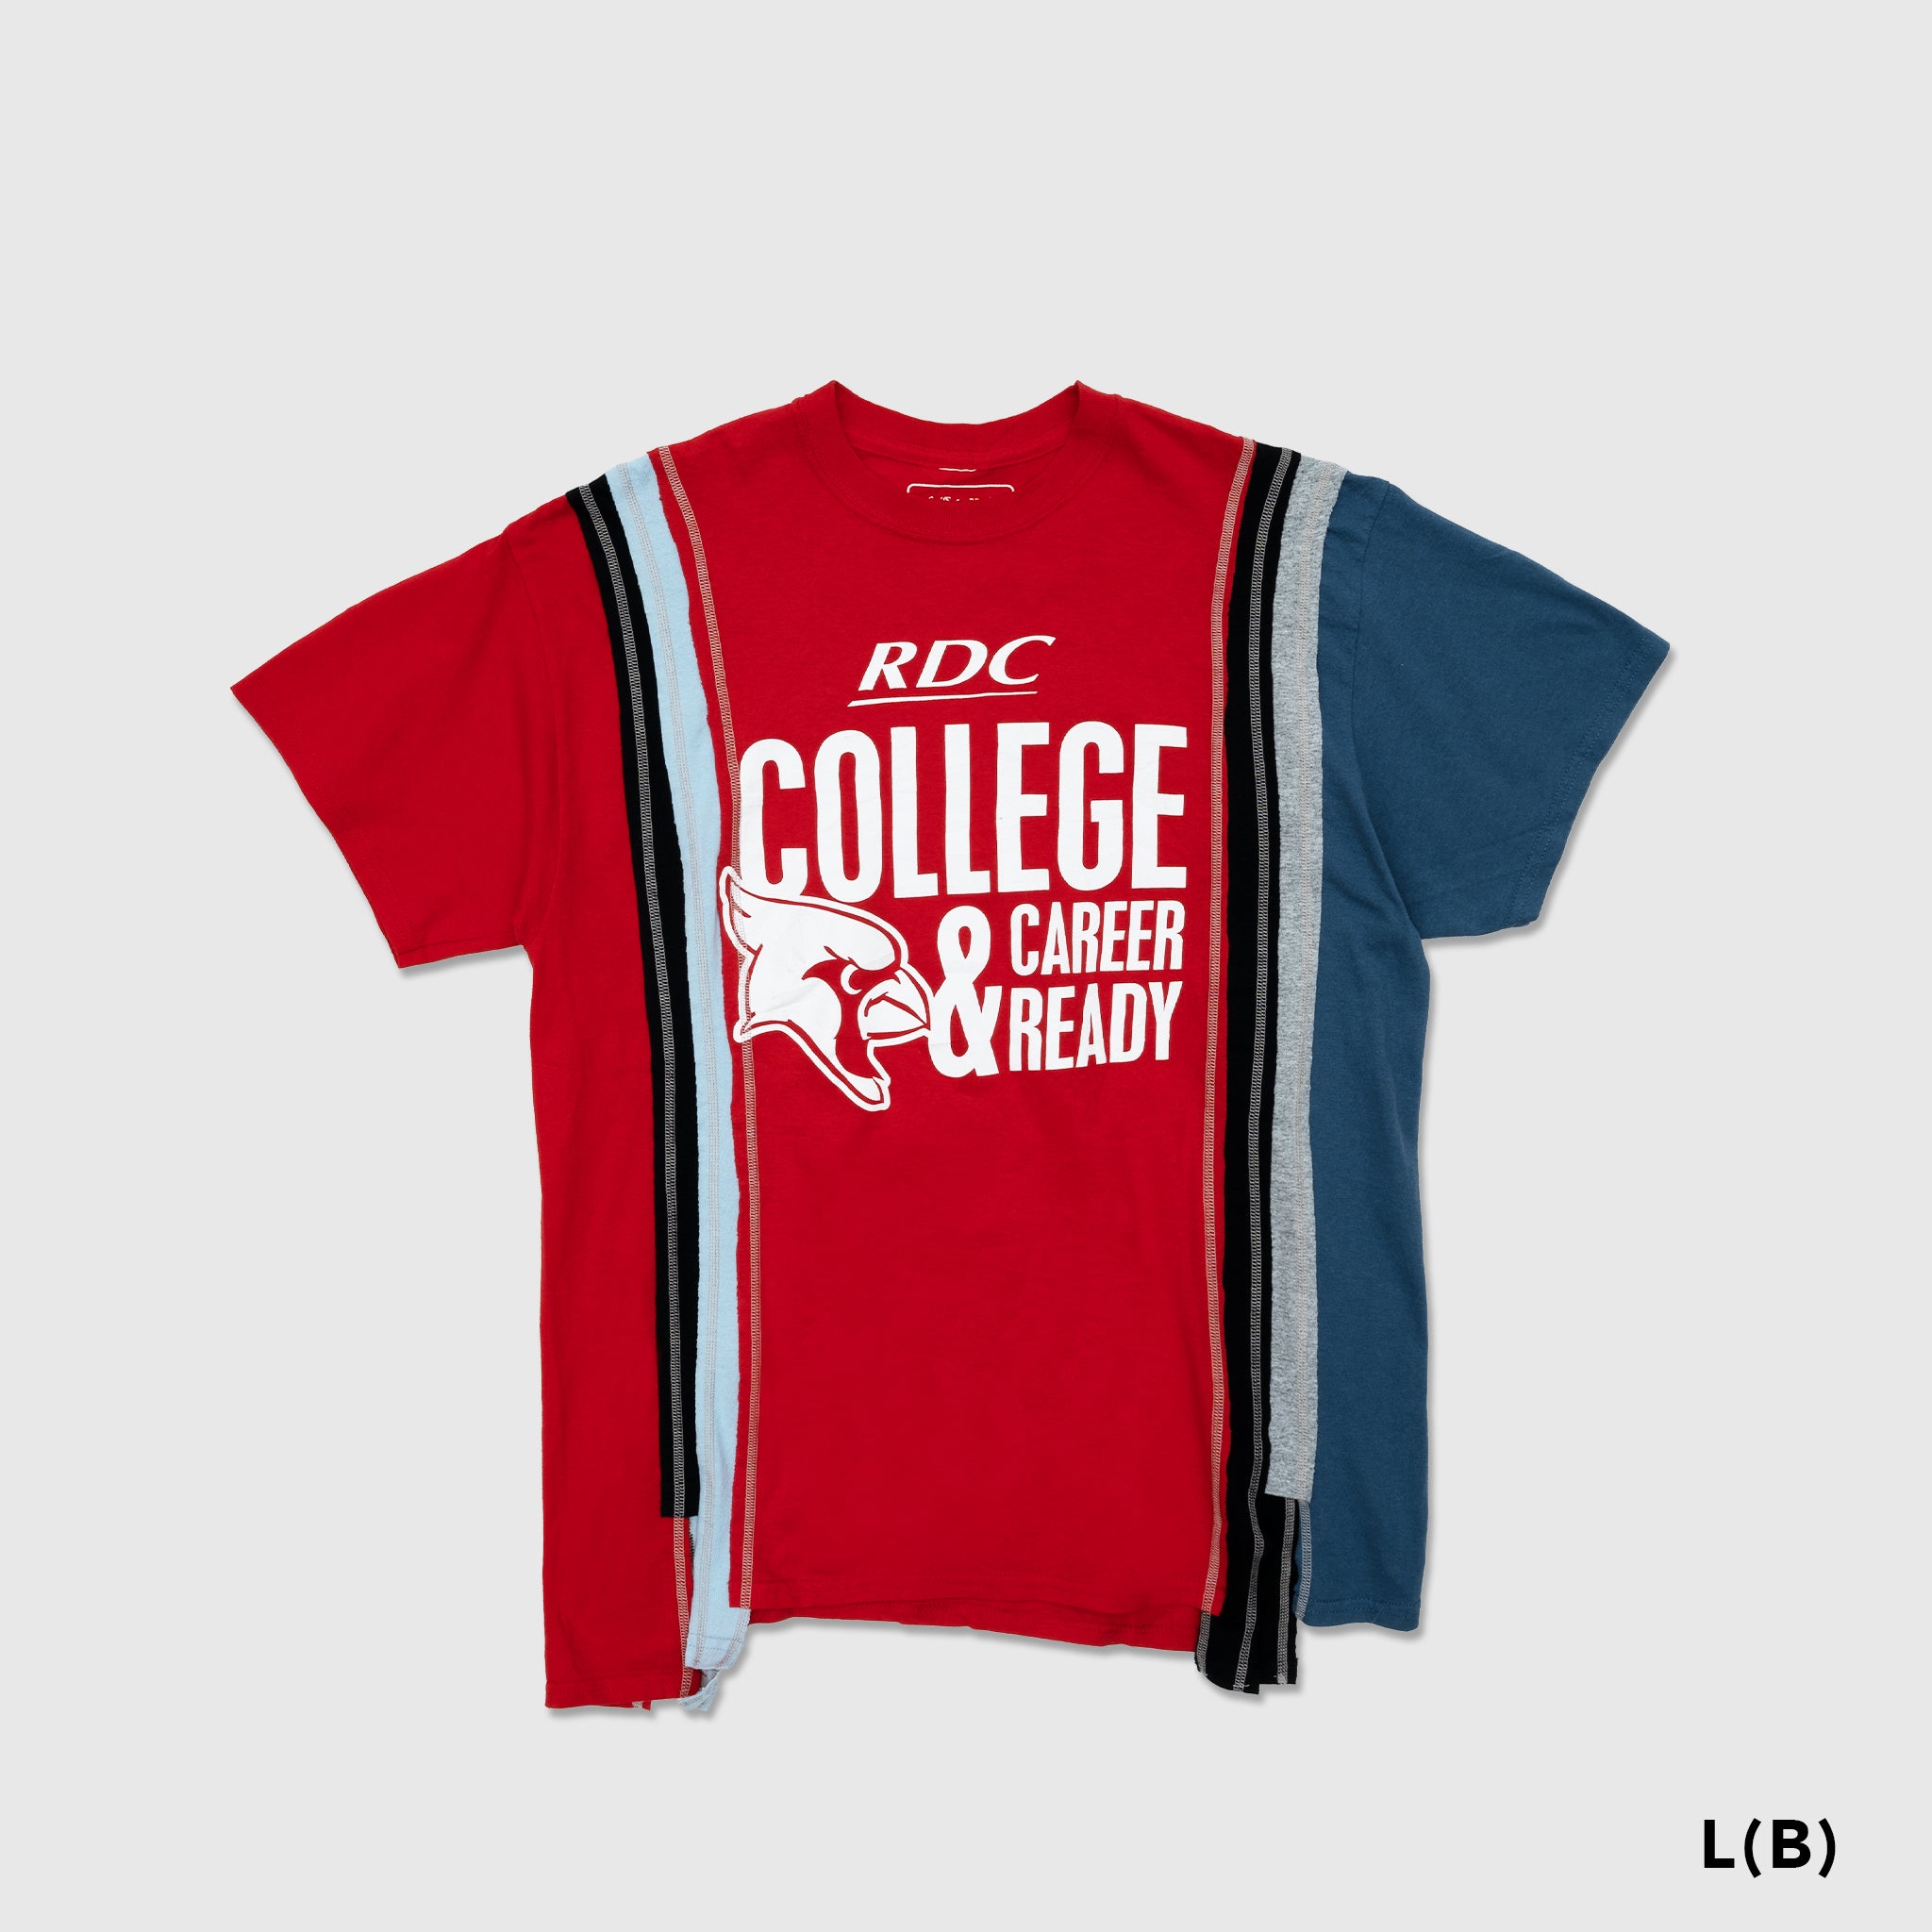 REBUILD BY NEEDLES 7 CUTS COLLEGE S/S T-SHIRT